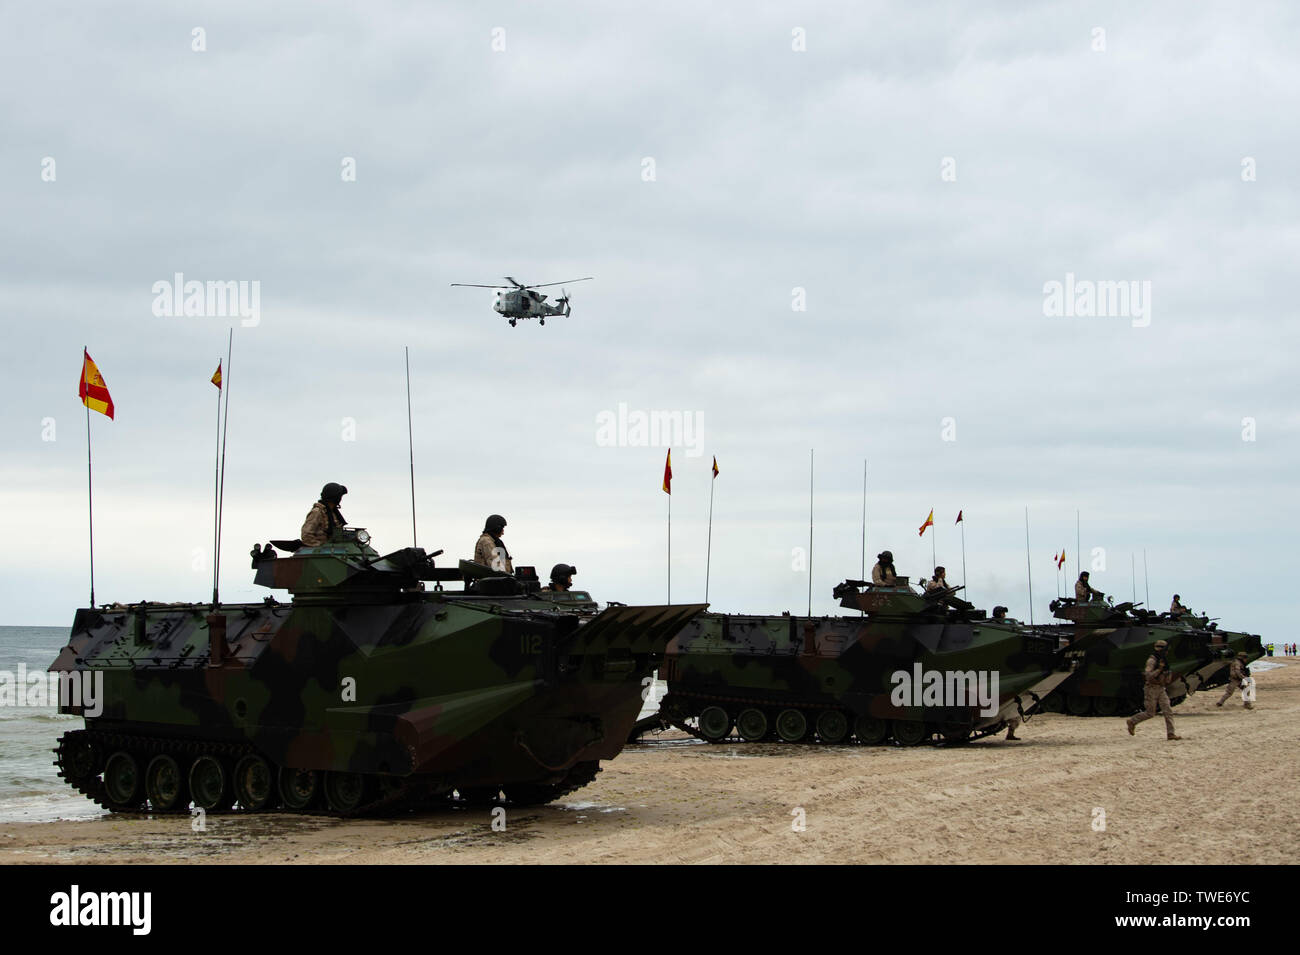 190616-N-MD802-1213 KLAIPEDA, Lithuania (June 16, 2019) Spanish amphibious assault vehicles (AAV) carry Spanish marines, assigned to 2nd Batallon De Desembarco, Brigada De Infanteria De Marina (2nd Landing Battalion, Marine Infantry Brigade) take part in an amphibious assault for exercise Baltic Operations (BALTOPS) 2019. BALTOPS is the premier annual maritime-focused exercise in the Baltic Region, marking the 47th year of one of the largest exercises in Northern Europe enhancing flexibility and interoperability among allied and partner nations. (U.S. Navy photo by Mass Communication Specialis Stock Photo